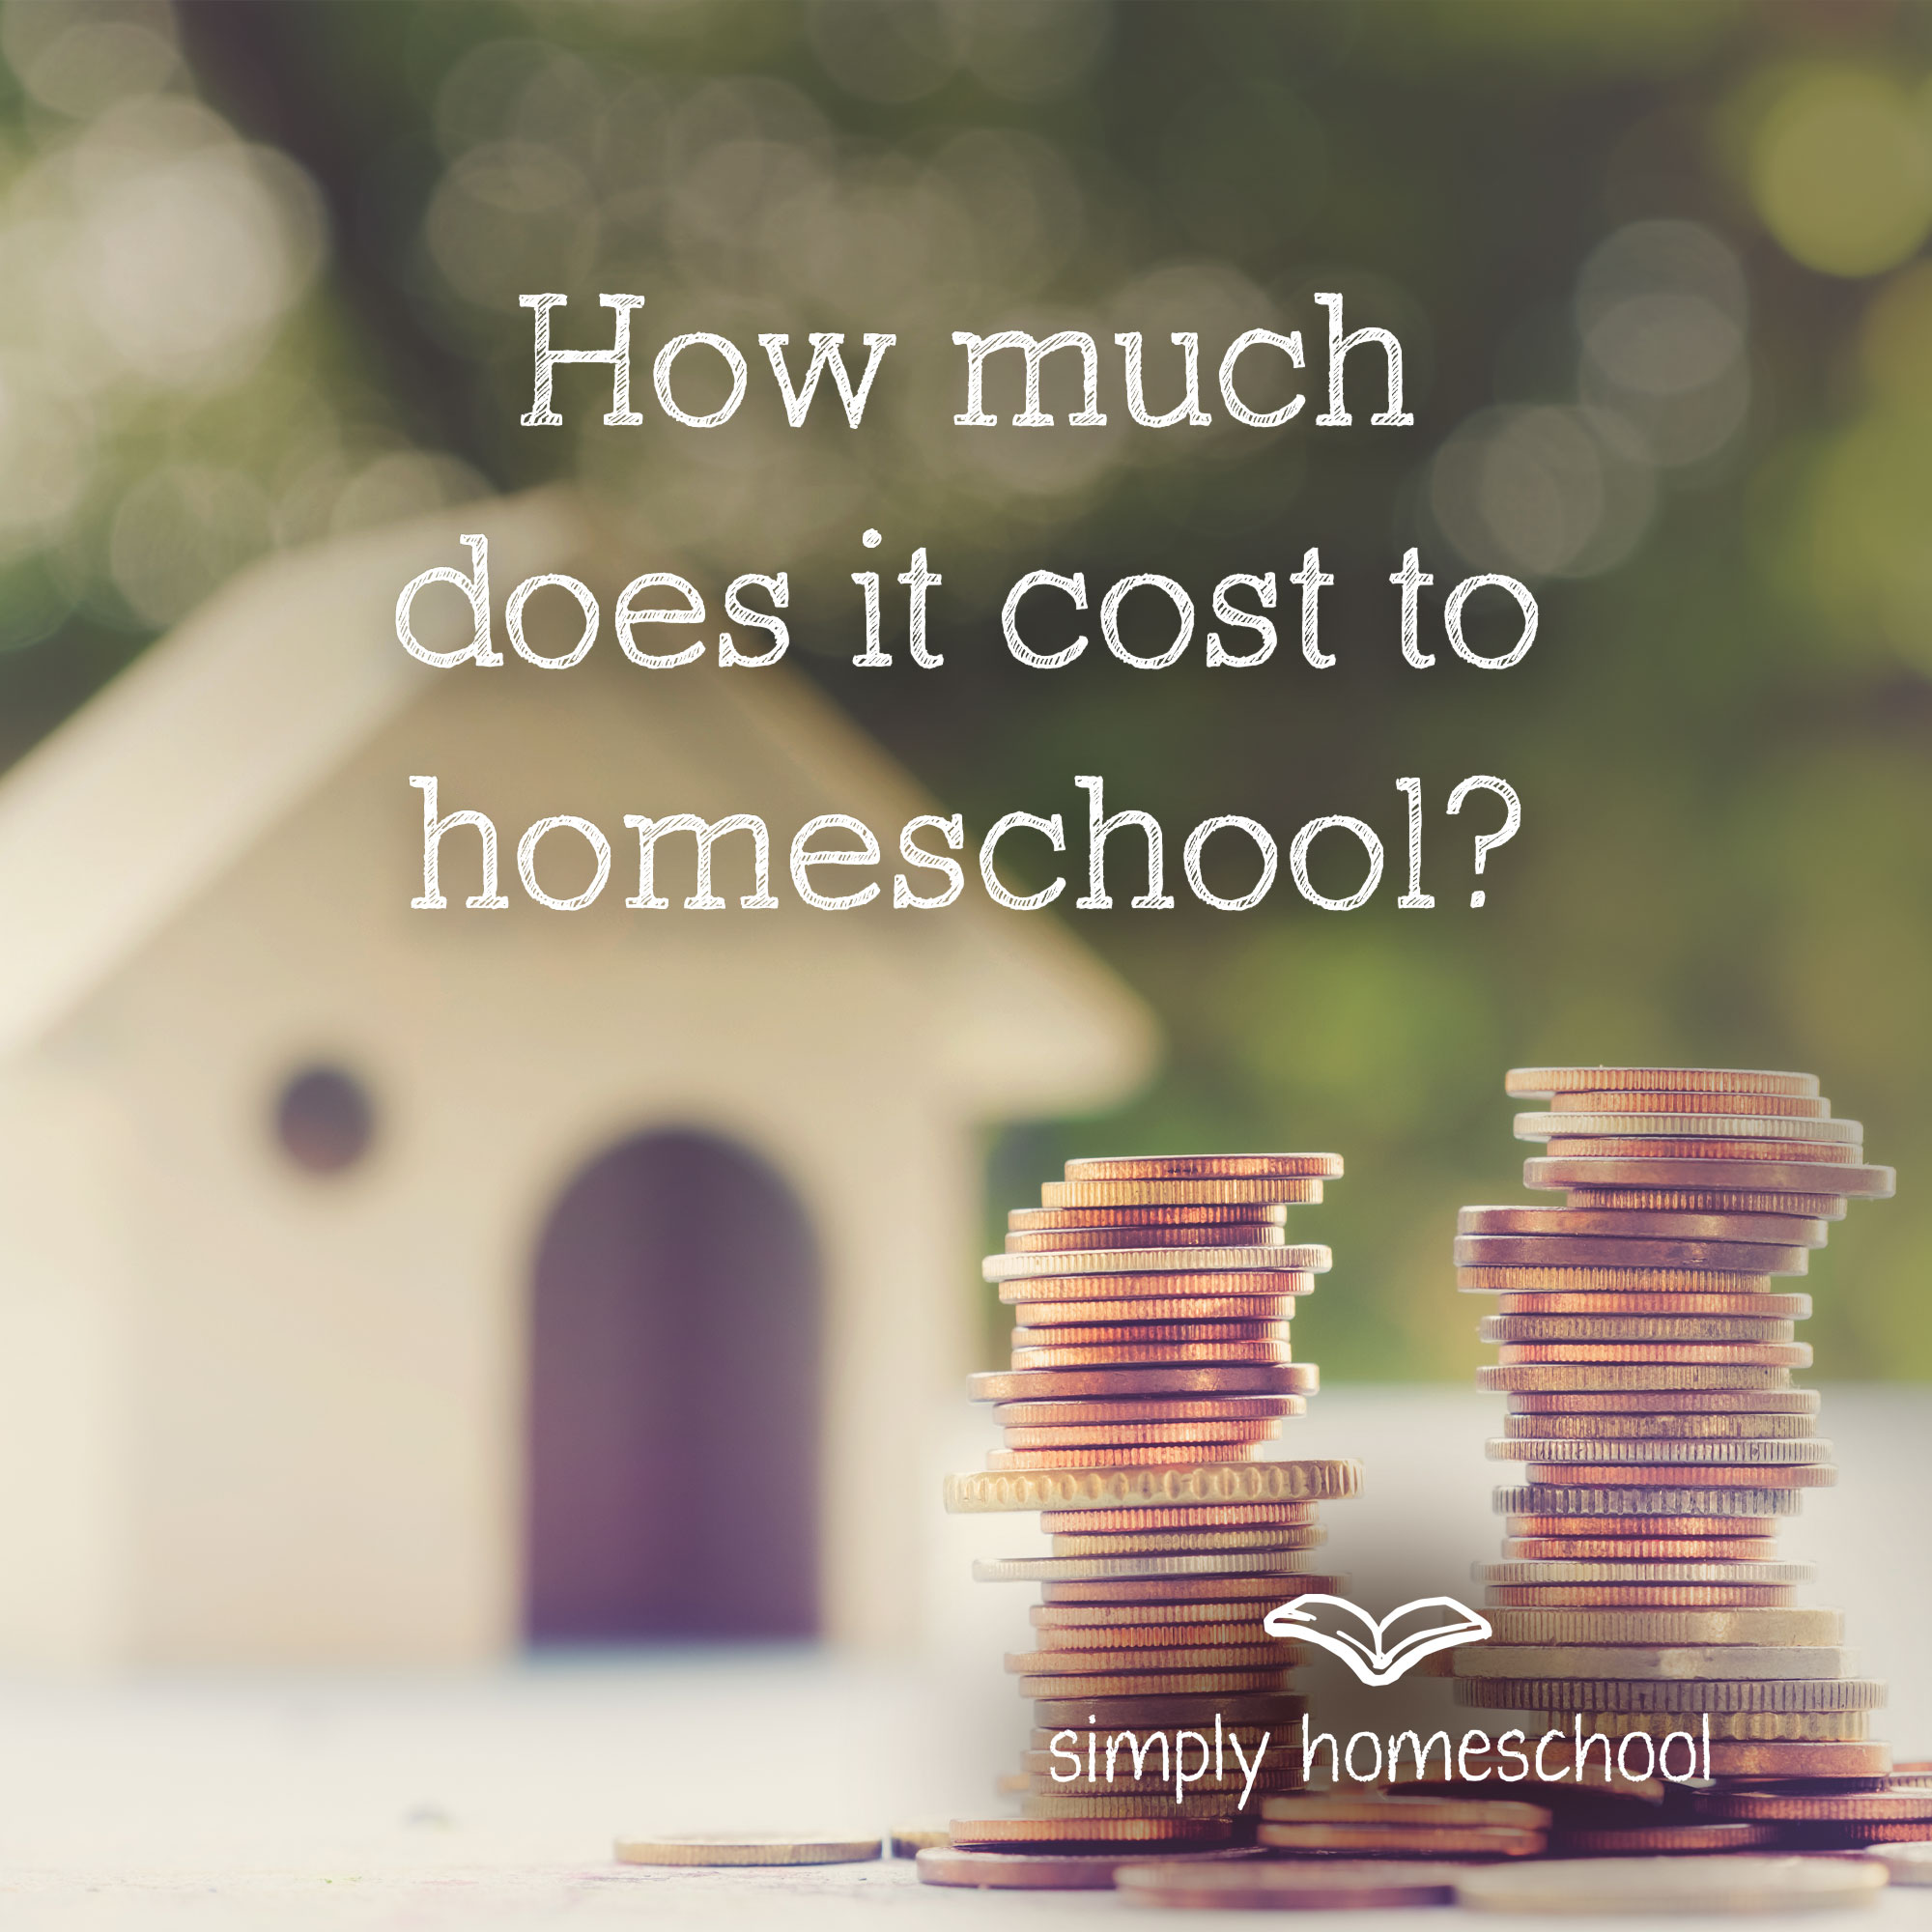 How Much Does it Cost to Homeschool?